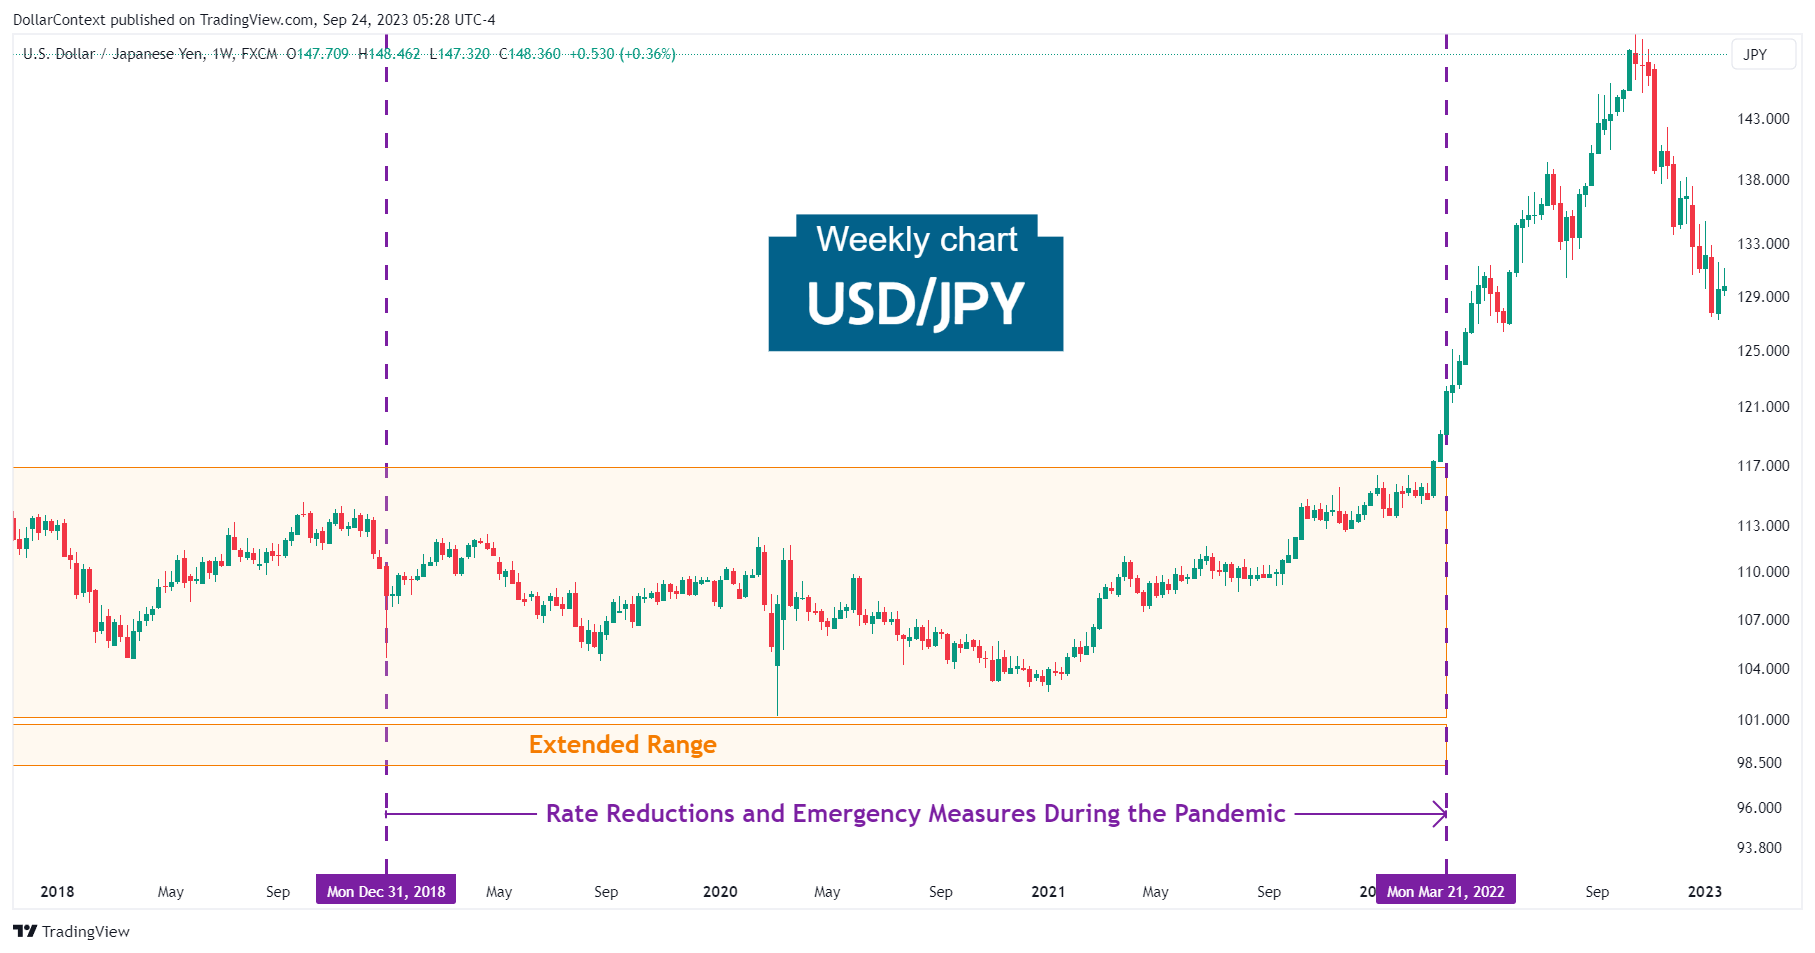 USD/JPY: Rate Reductions and Emergency Cuts During the Pandemic (Weekly Chart)